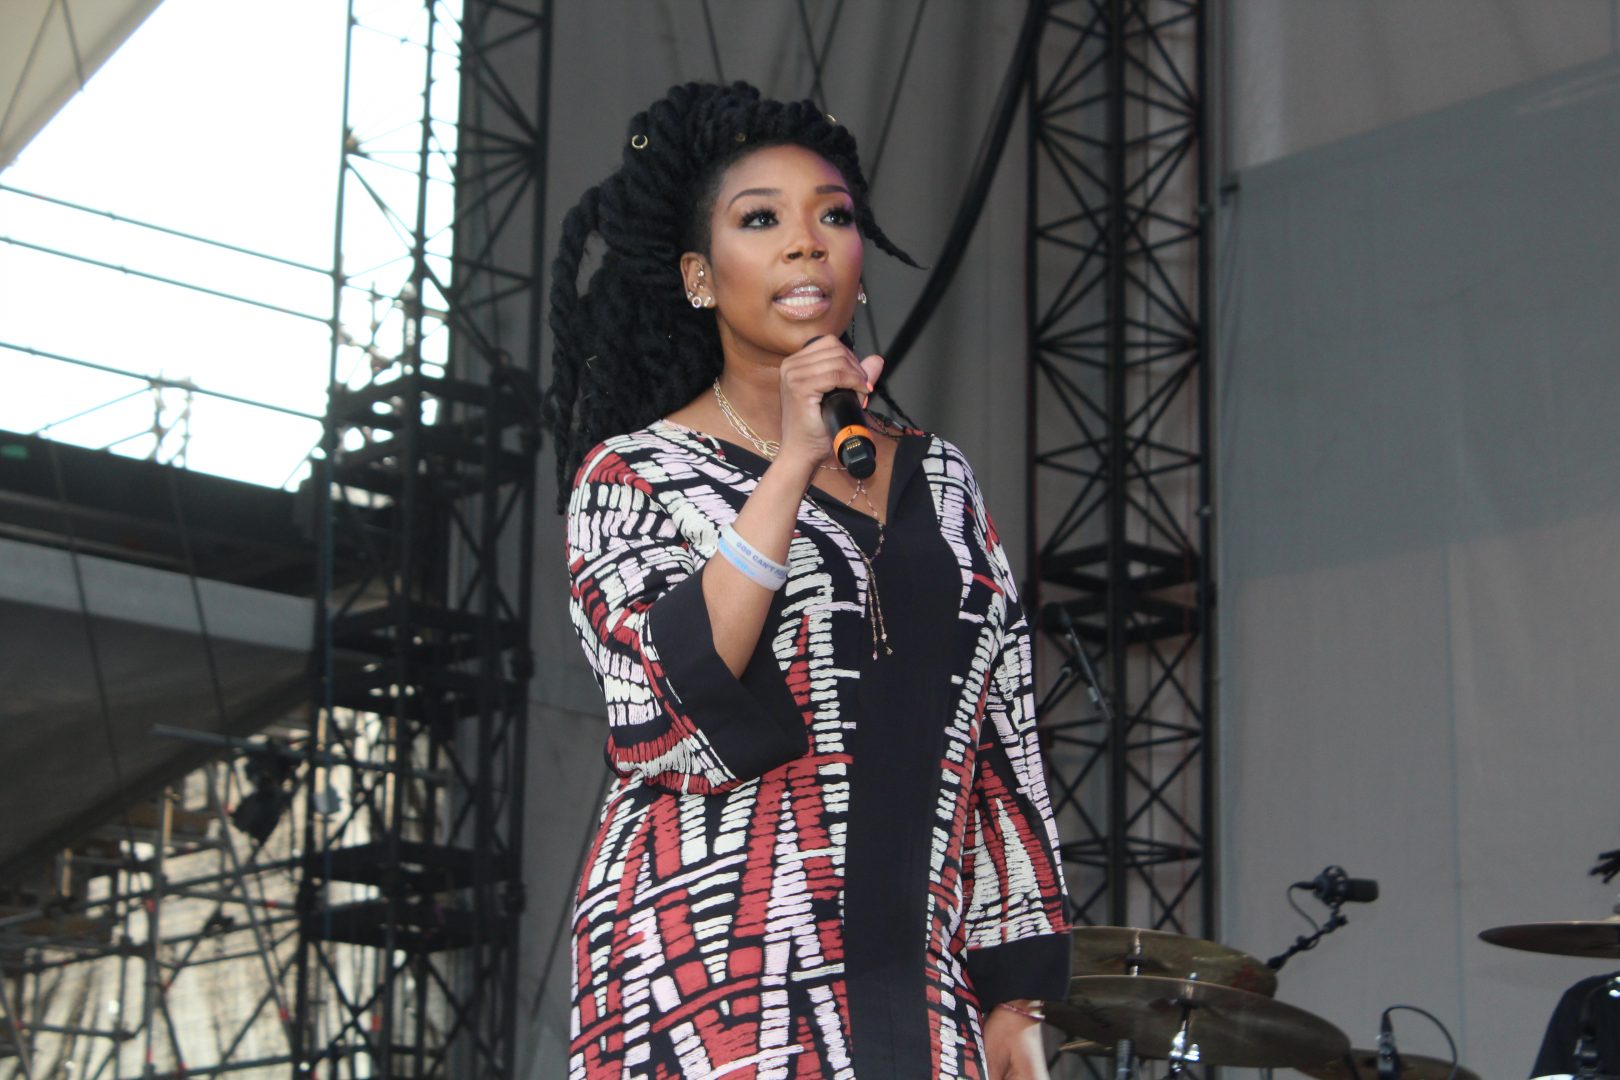 Brandy tells 2 Grammy Award winners to 'pull up' and collaborate